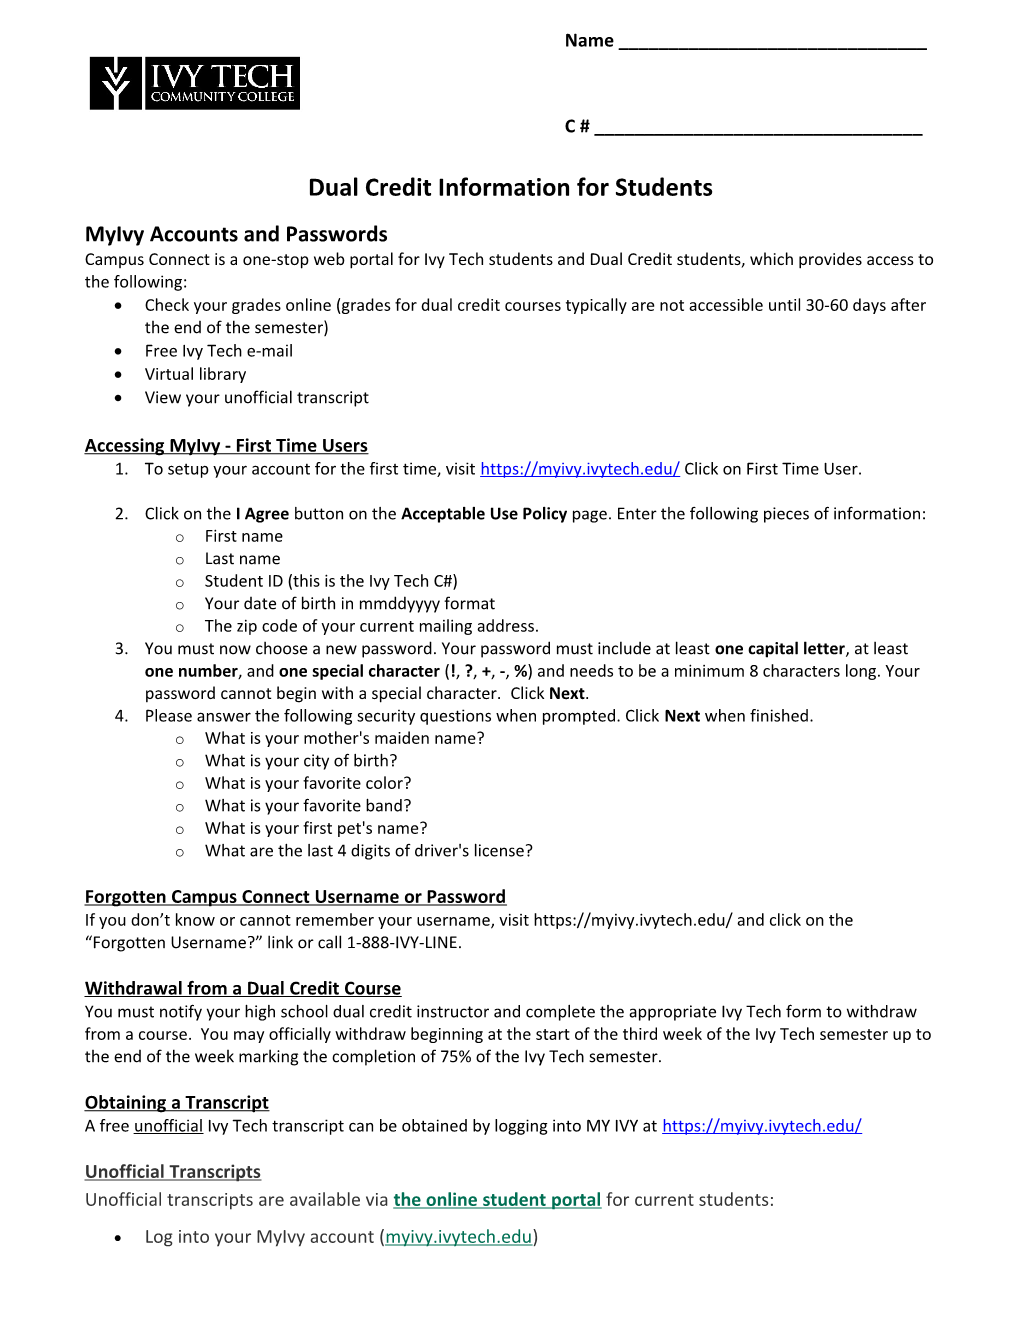 Dual Credit Informationfor Students